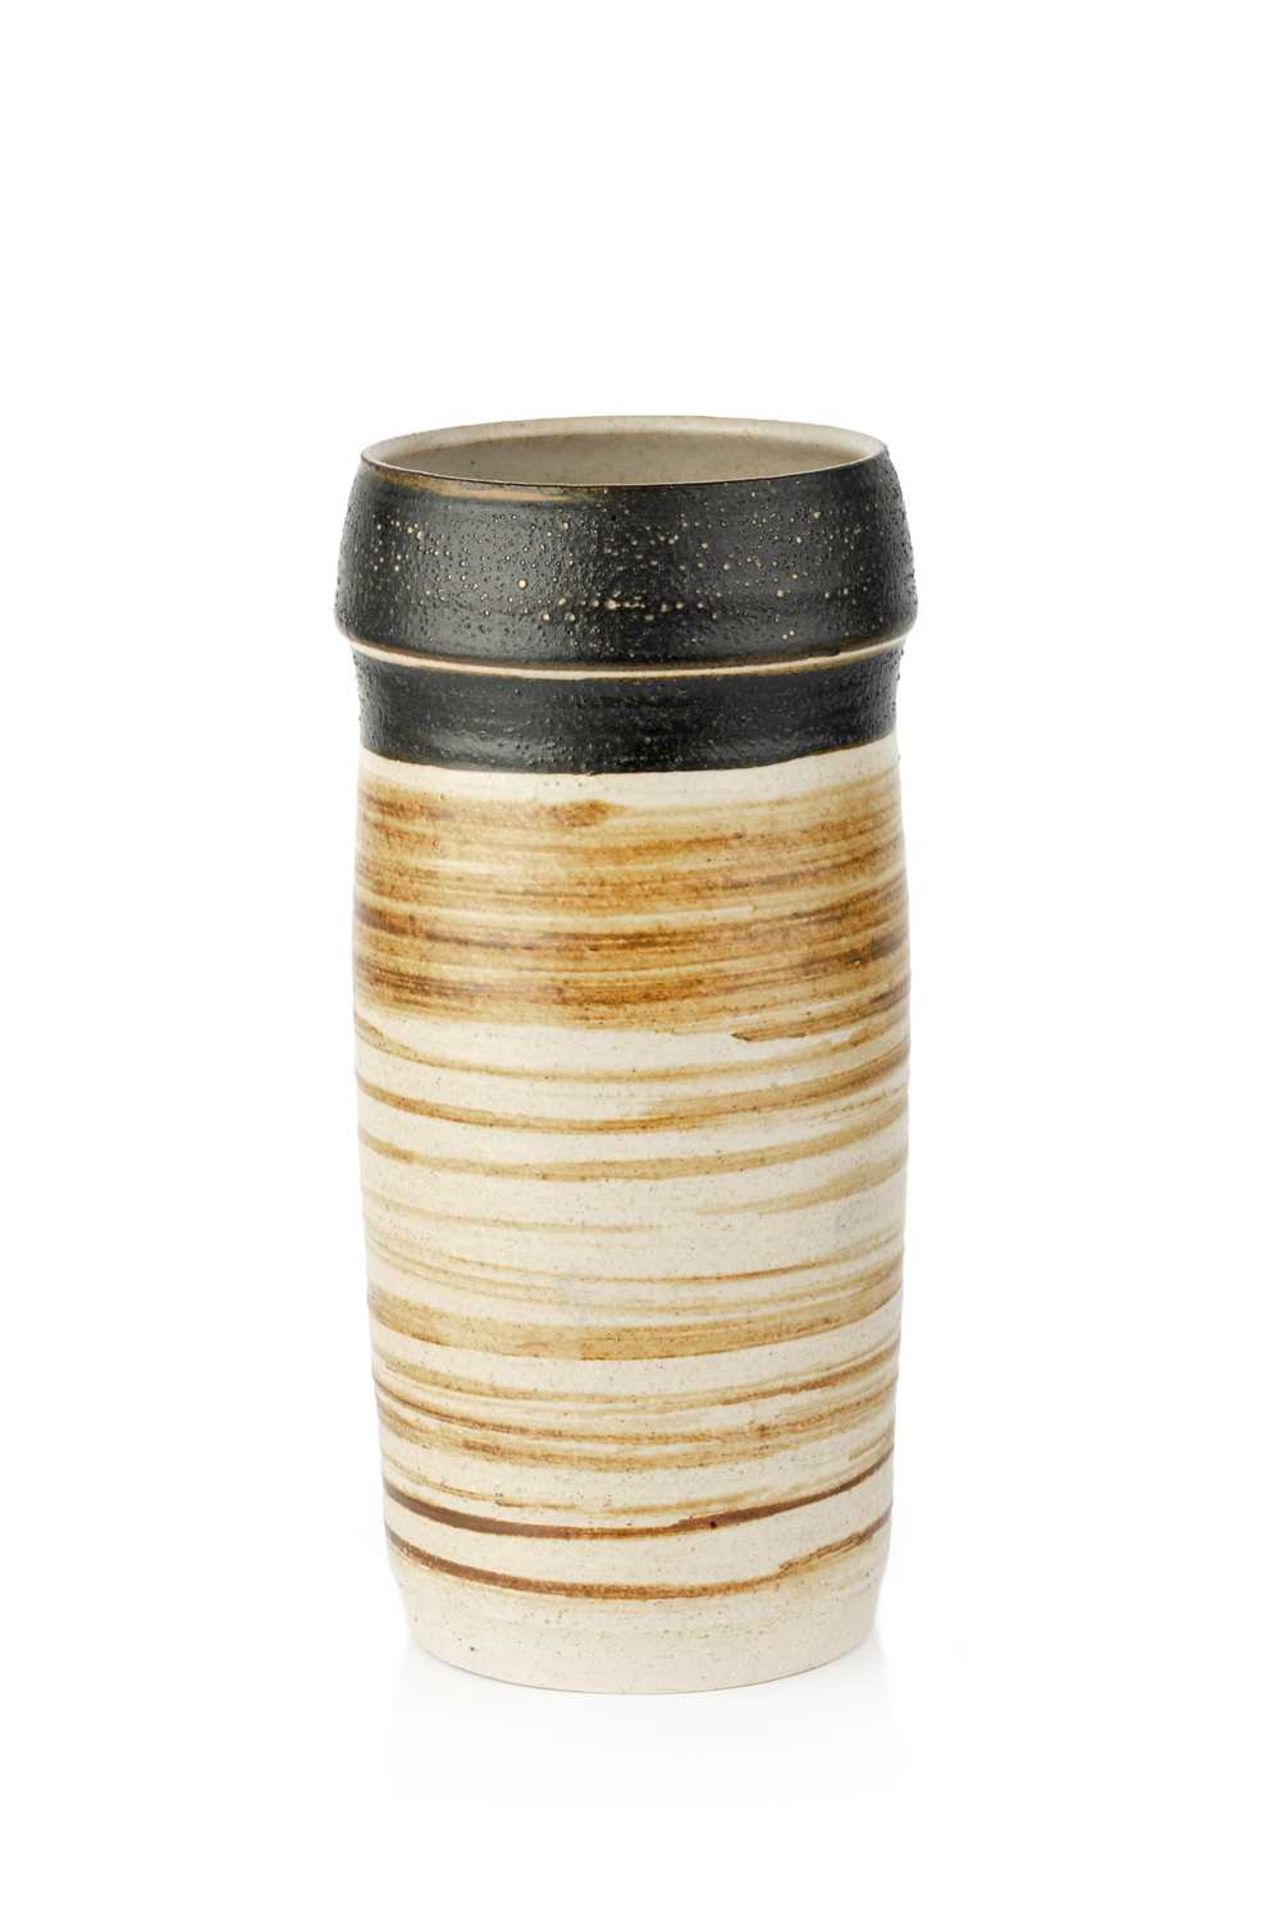 Michael Casson (1925-2003) Cylindrical vase with brushed rings and dark rim impressed potter's